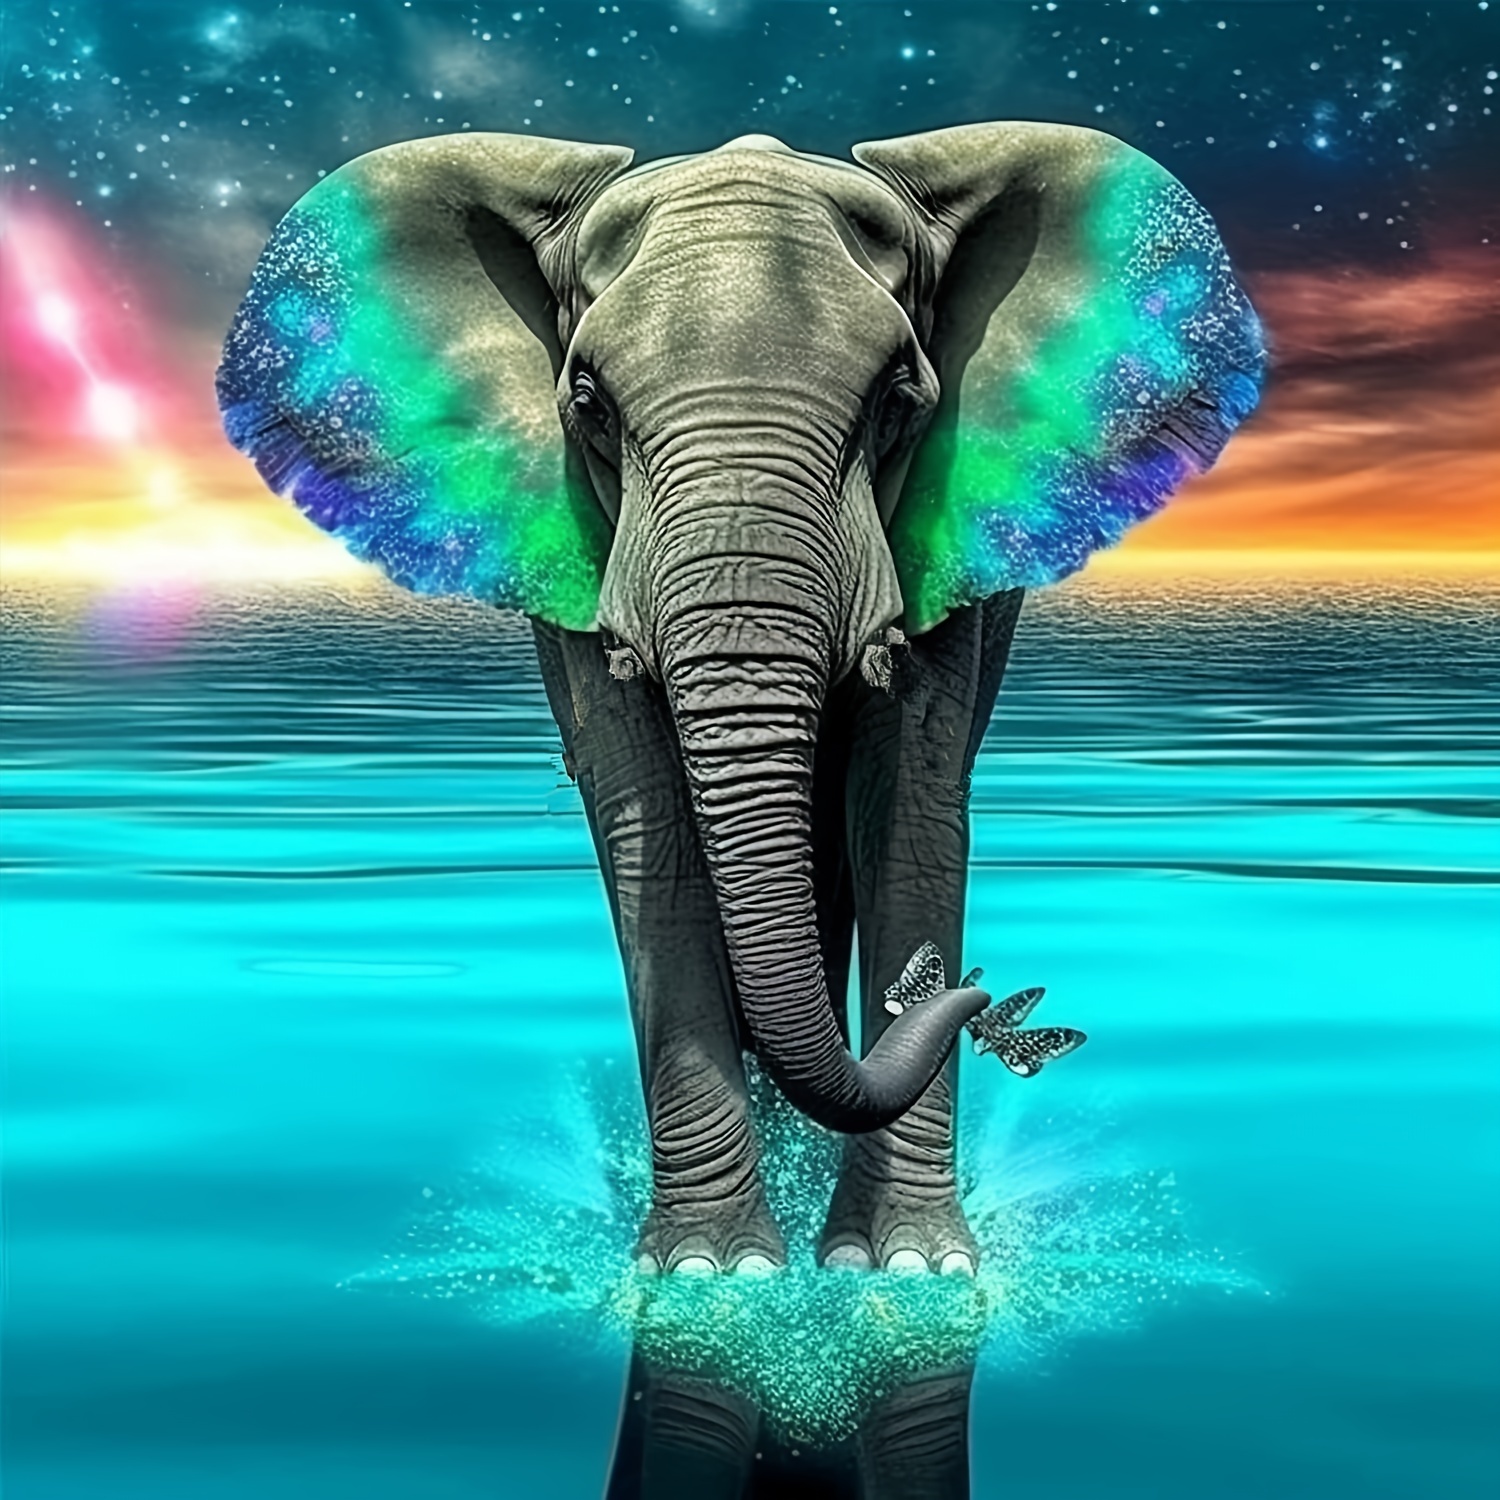 

1pc Of 7.9*7.9 Inches 5d Diy Diamond Art Painting, Green Elephant Animal, Full Diamond Diamond Art Painting, Embroidery Kit, Handmade Home Decoration